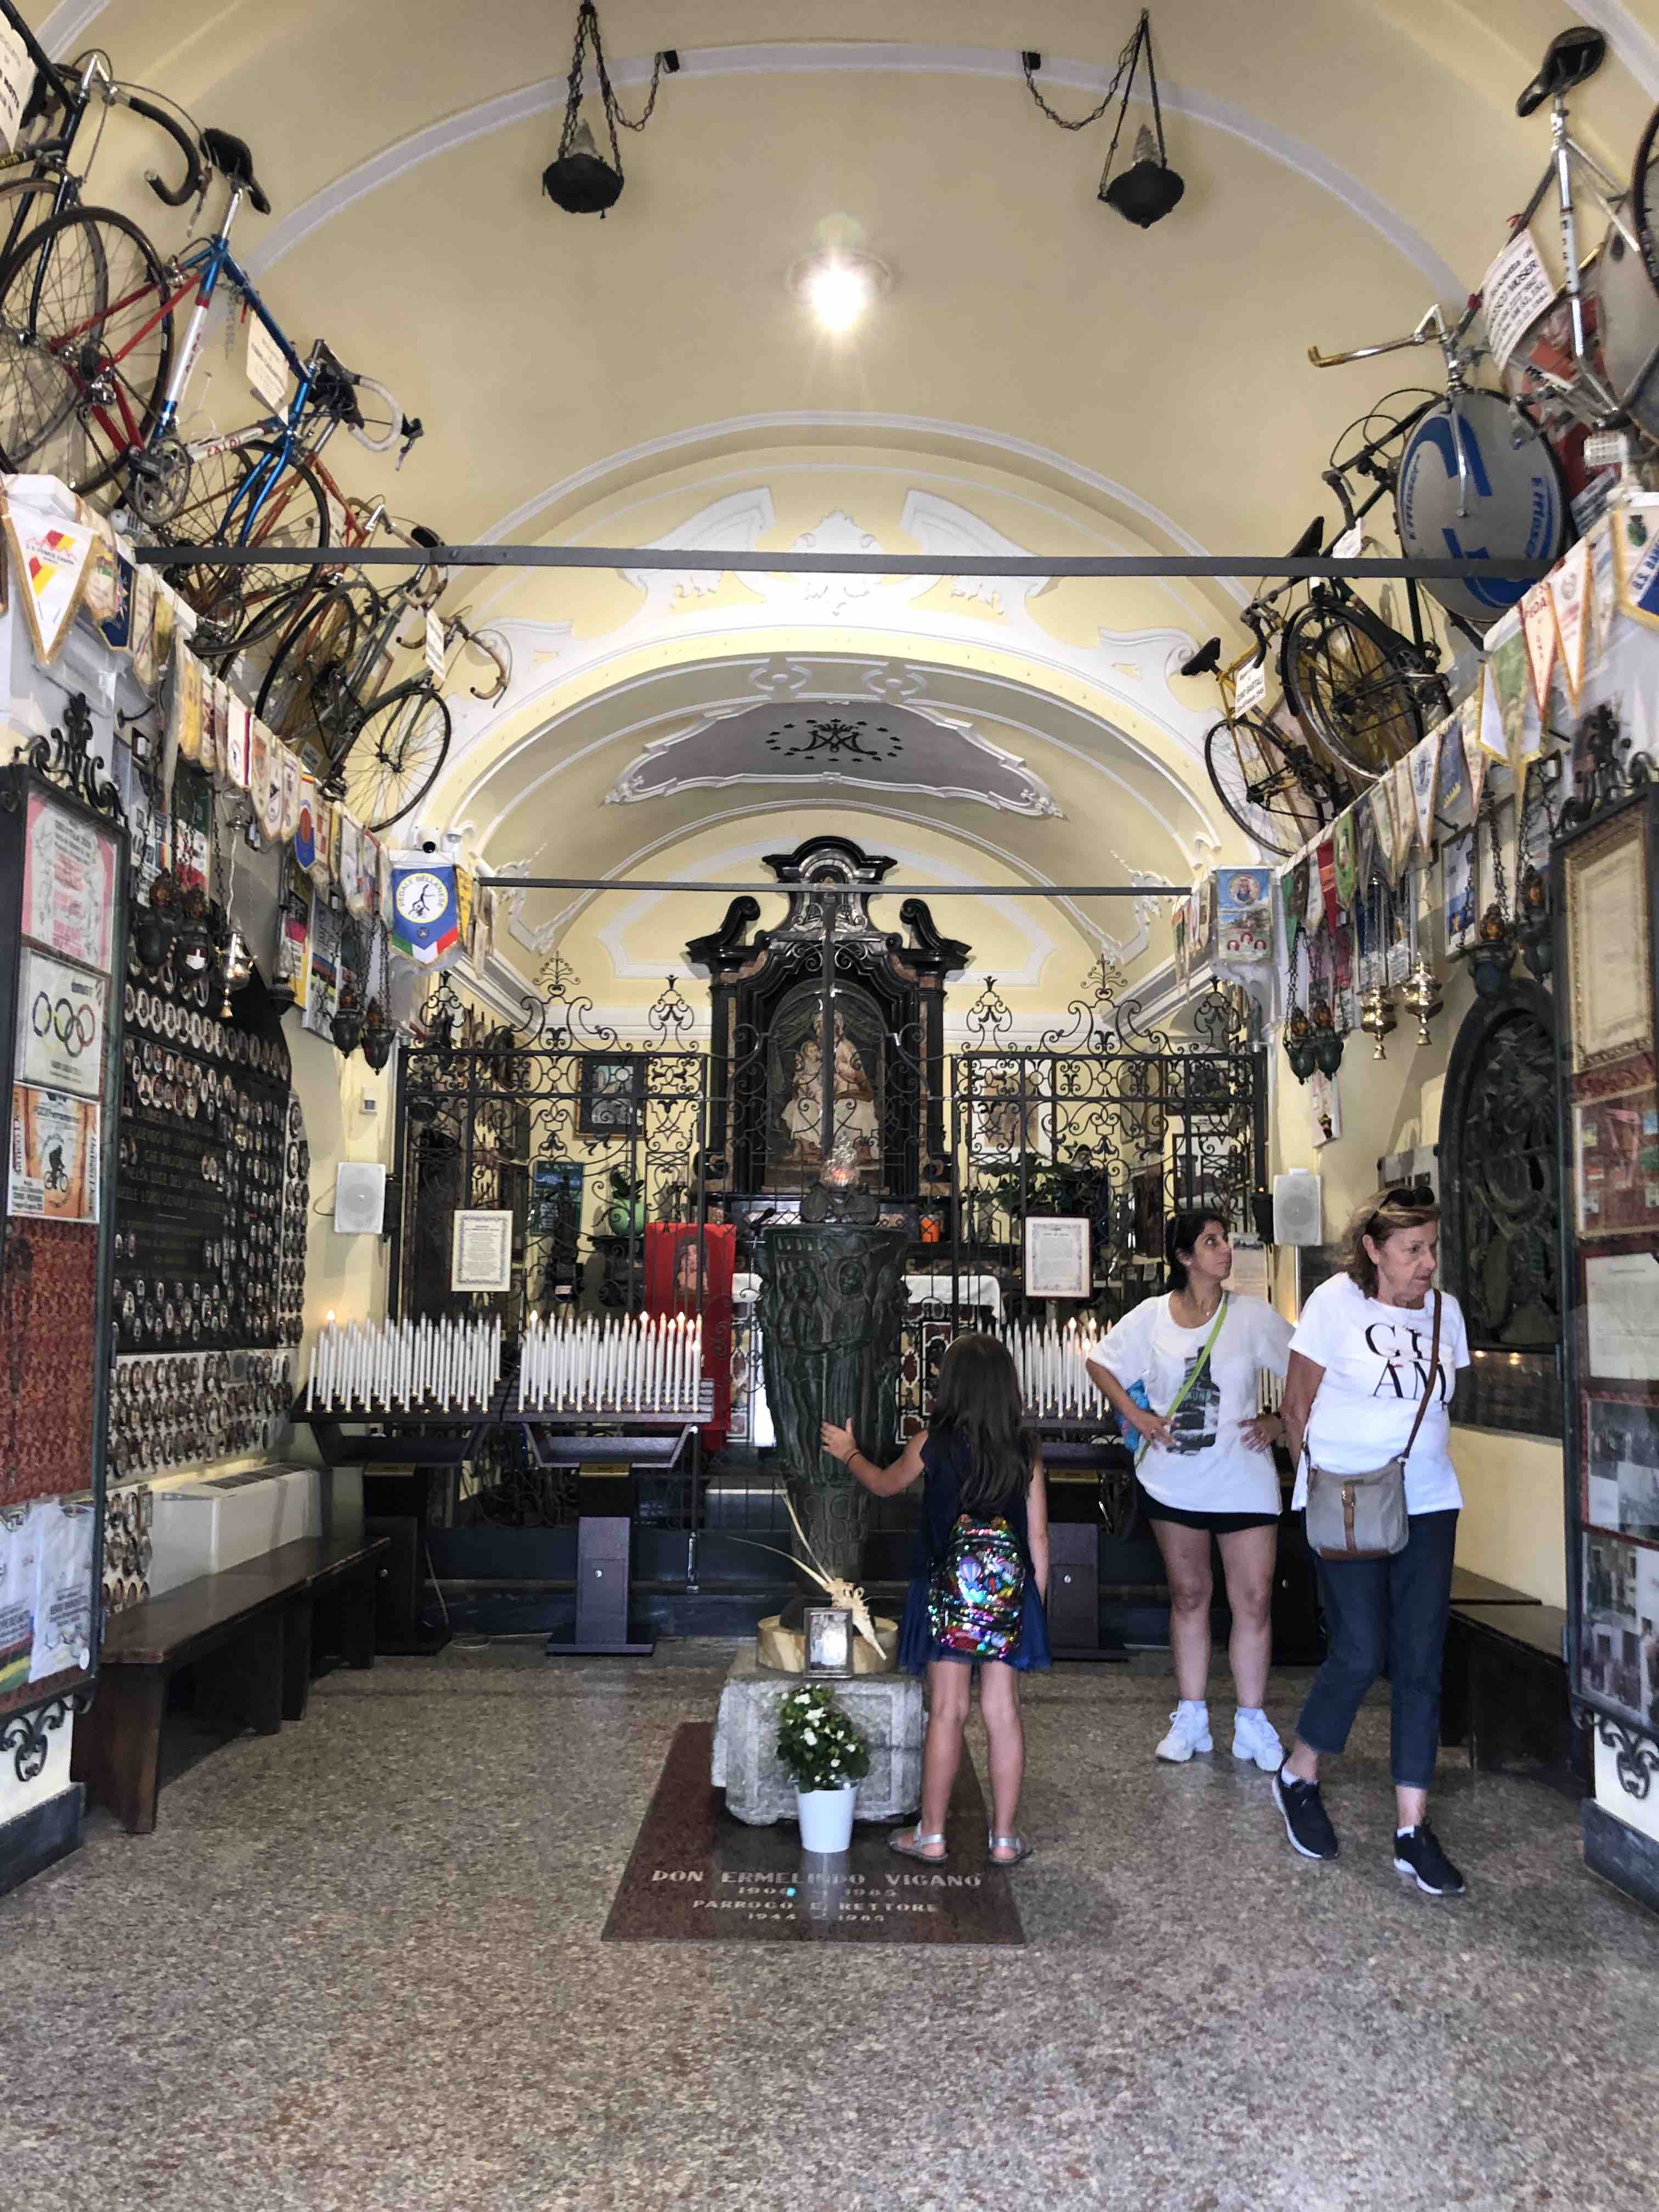 Inside the Madonna del Ghisallo church, a shrine to fallen professional cyclists